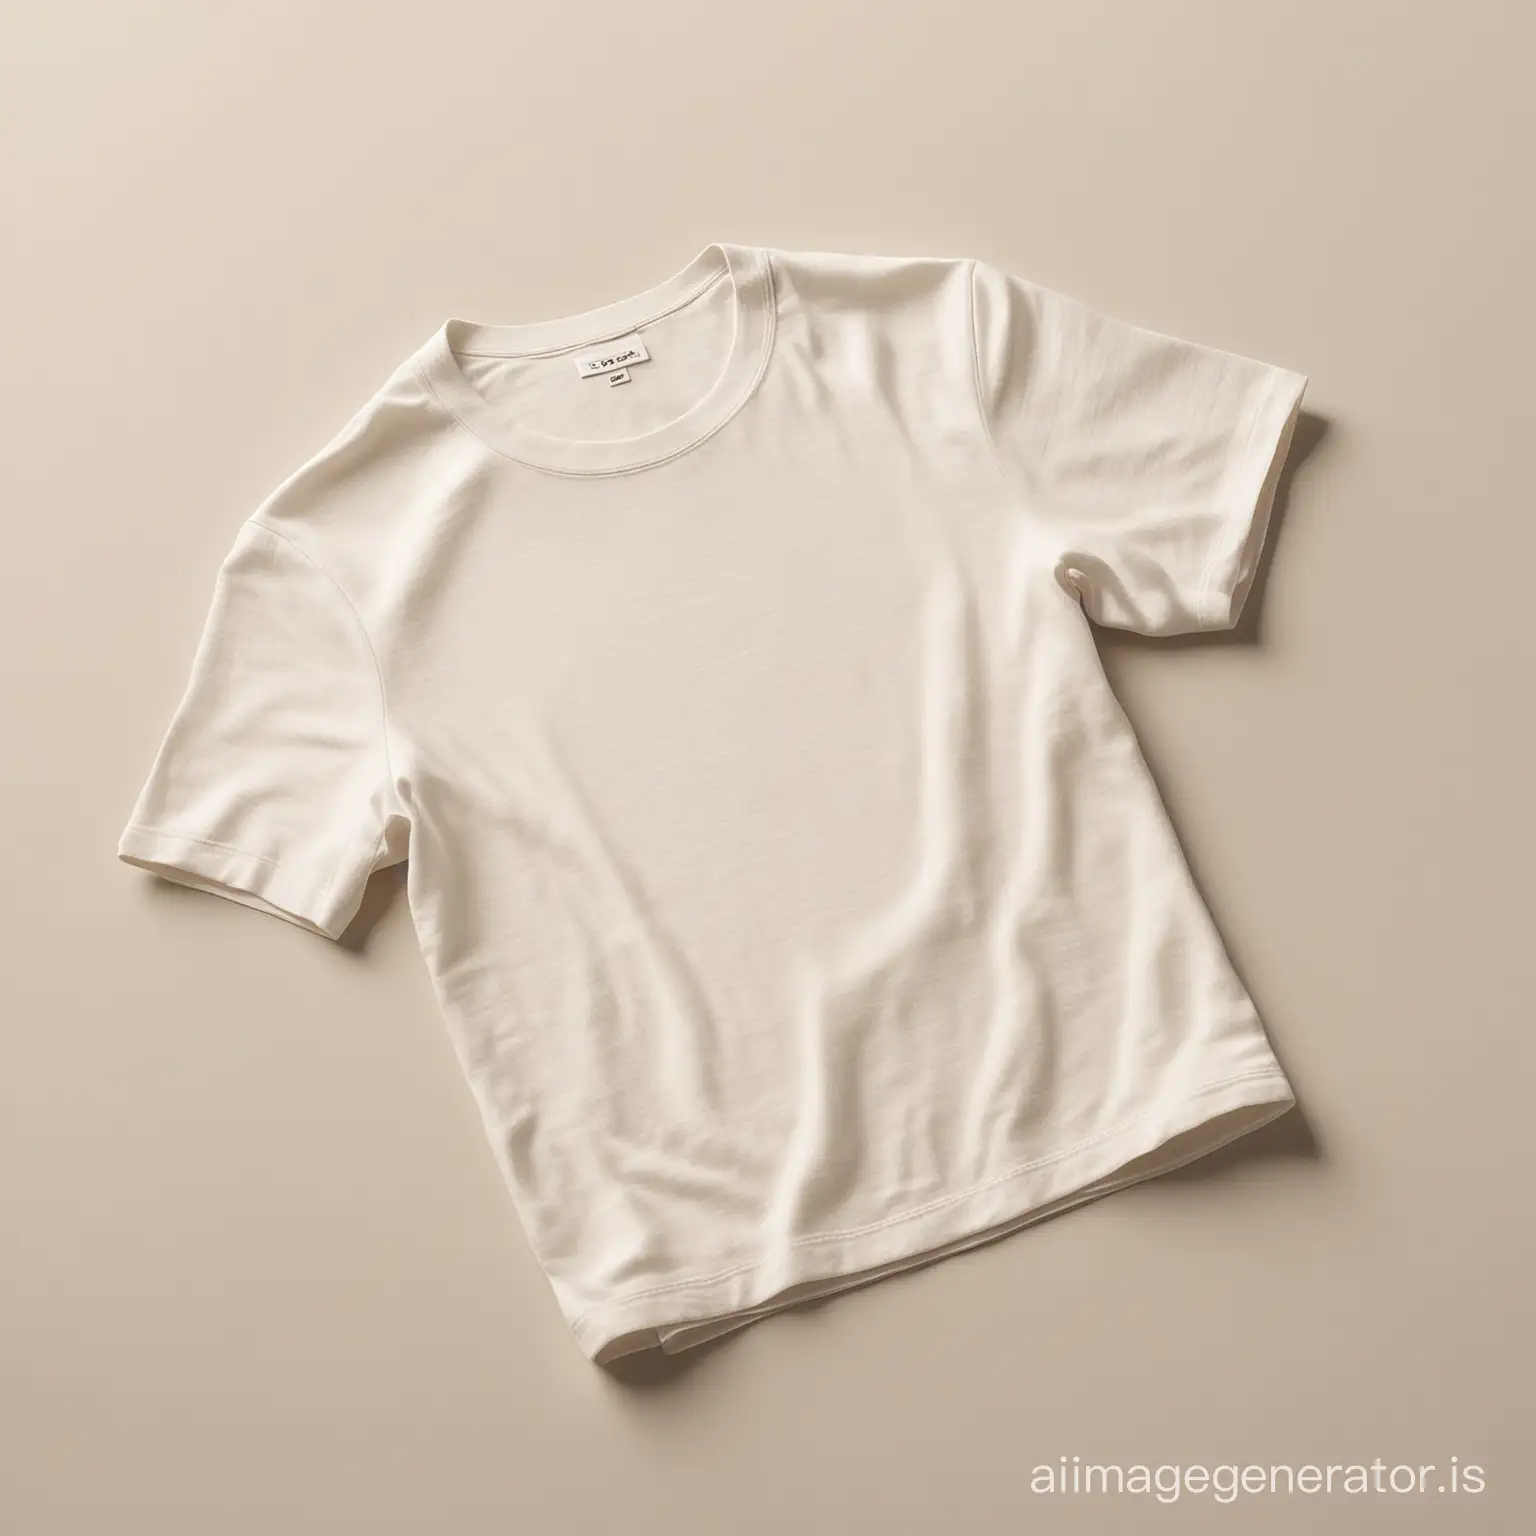 Super-realistic studio photo of a t shirt cotton  in a rich, ivory color. Natural daylight streams in from the side, casting soft shadows that highlight the cotton texture of the cotton. Background is a seamless white paper with a subtle texture, creating a clean, luxurious feel. Background is a photostudio. Overall aesthetic is high-end, minimalist, and inviting, reminiscent of a Zara brand catalog.